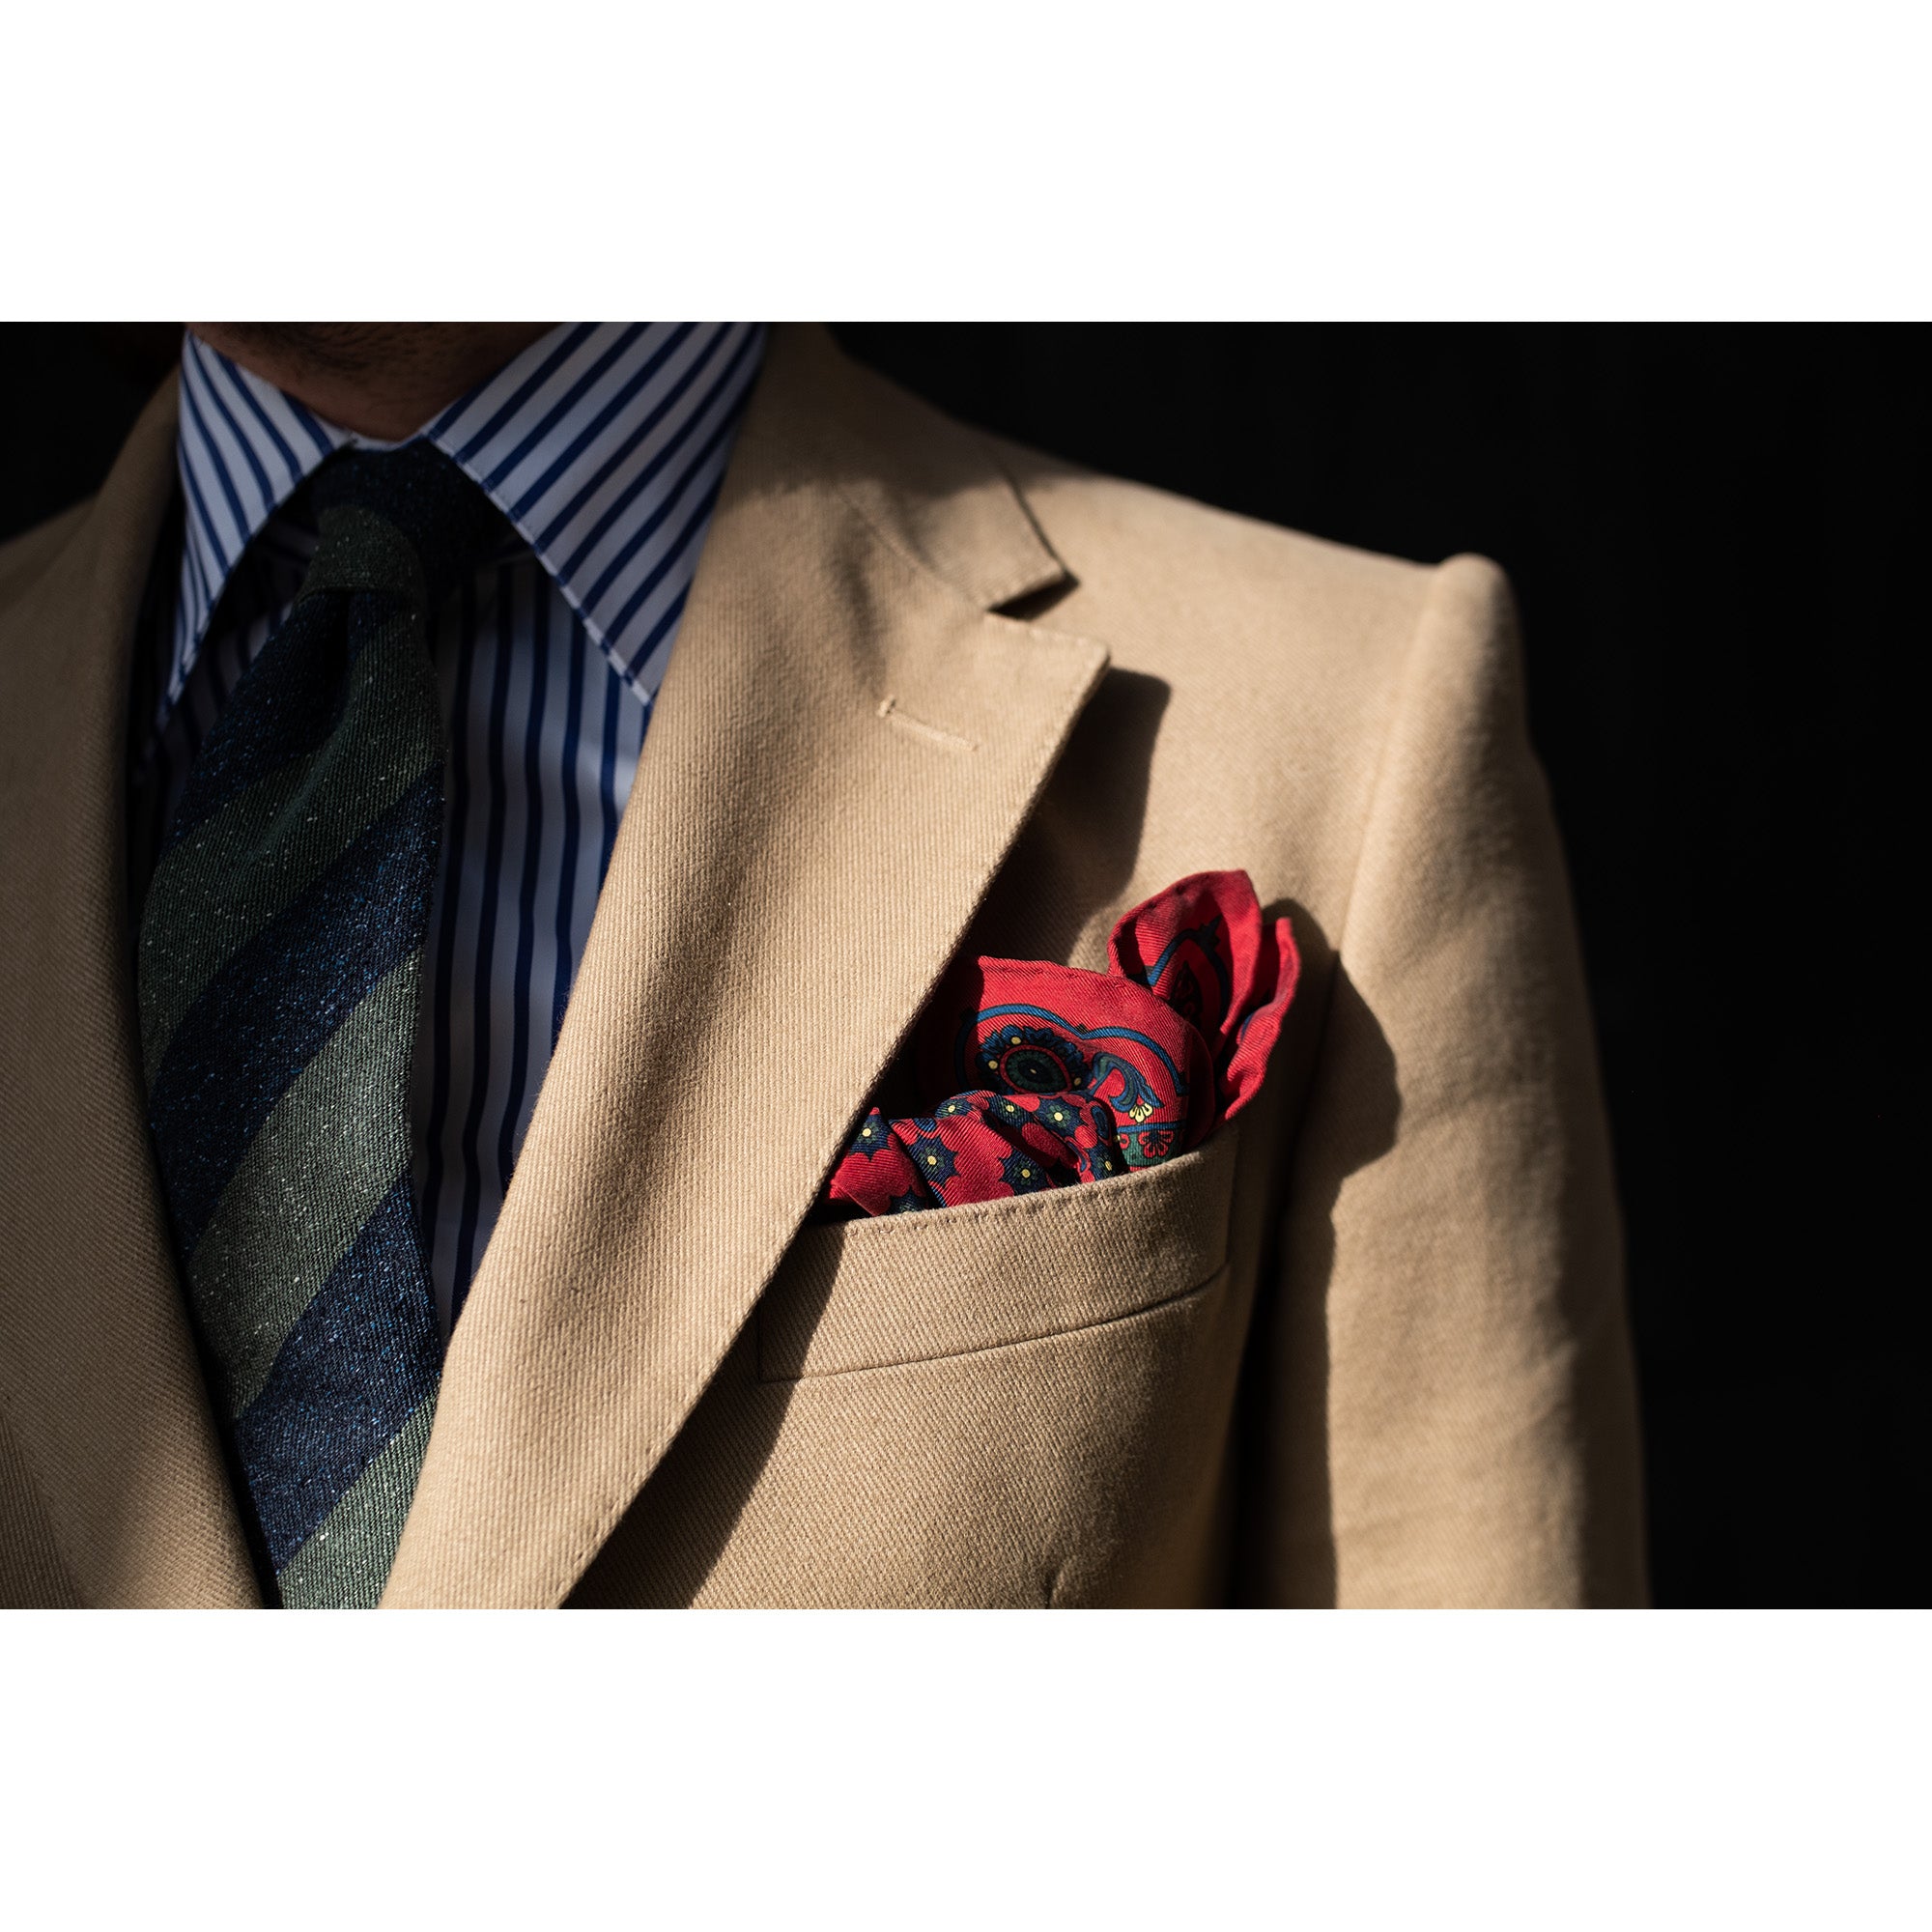 Pocket Square - Red Paisley